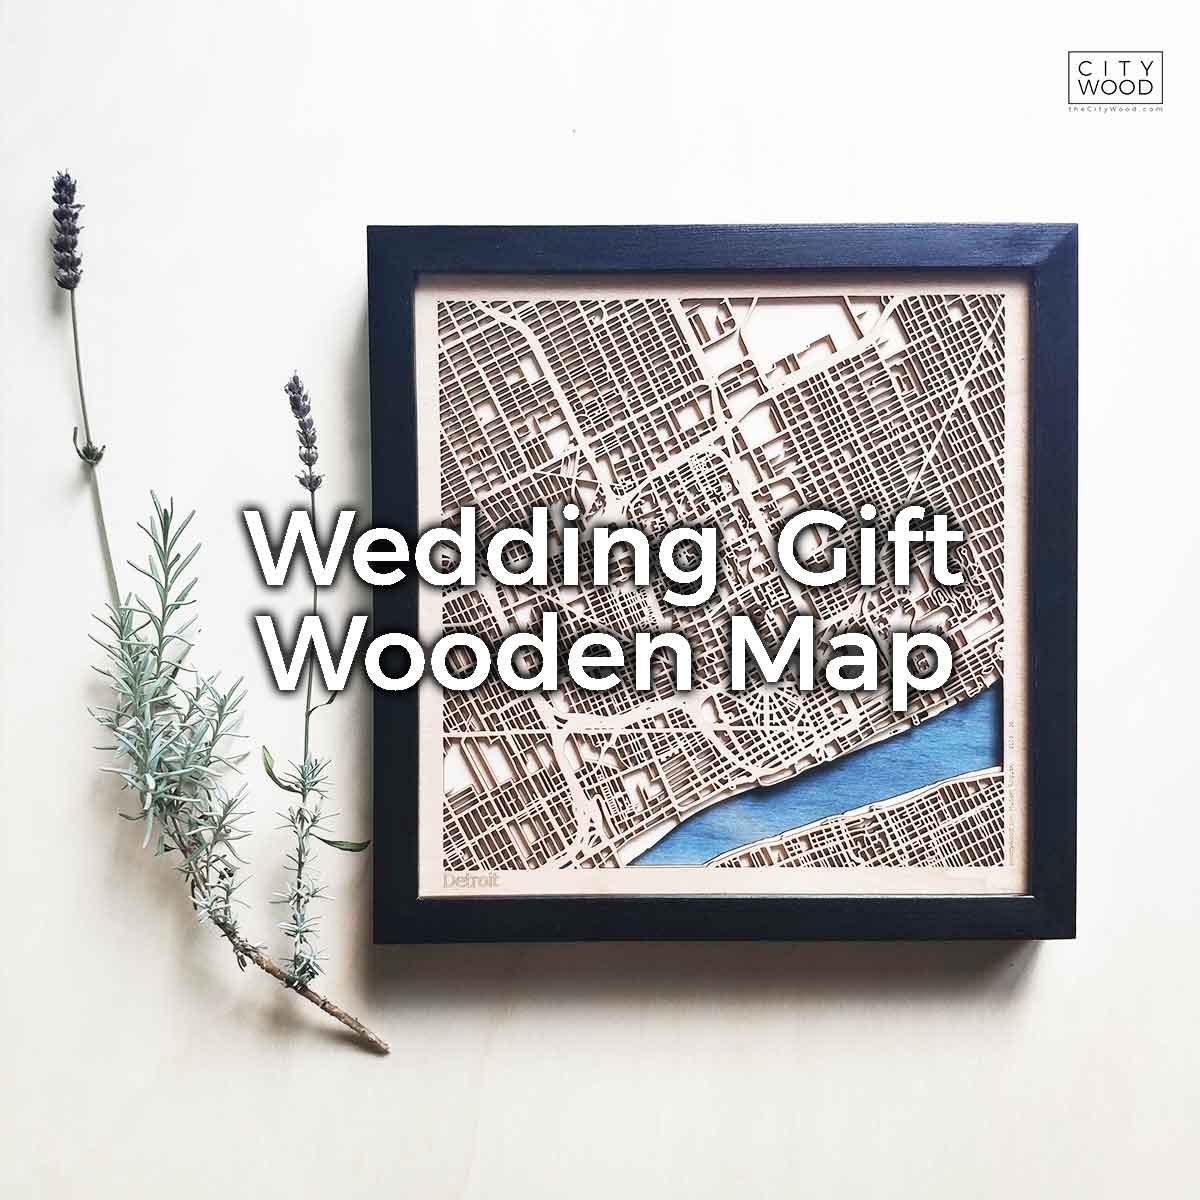 Wedding Gift Wooden Map by CityWood - Custom Wood Map Art - Unique Laser Cut Engraved - Anniversary Gift